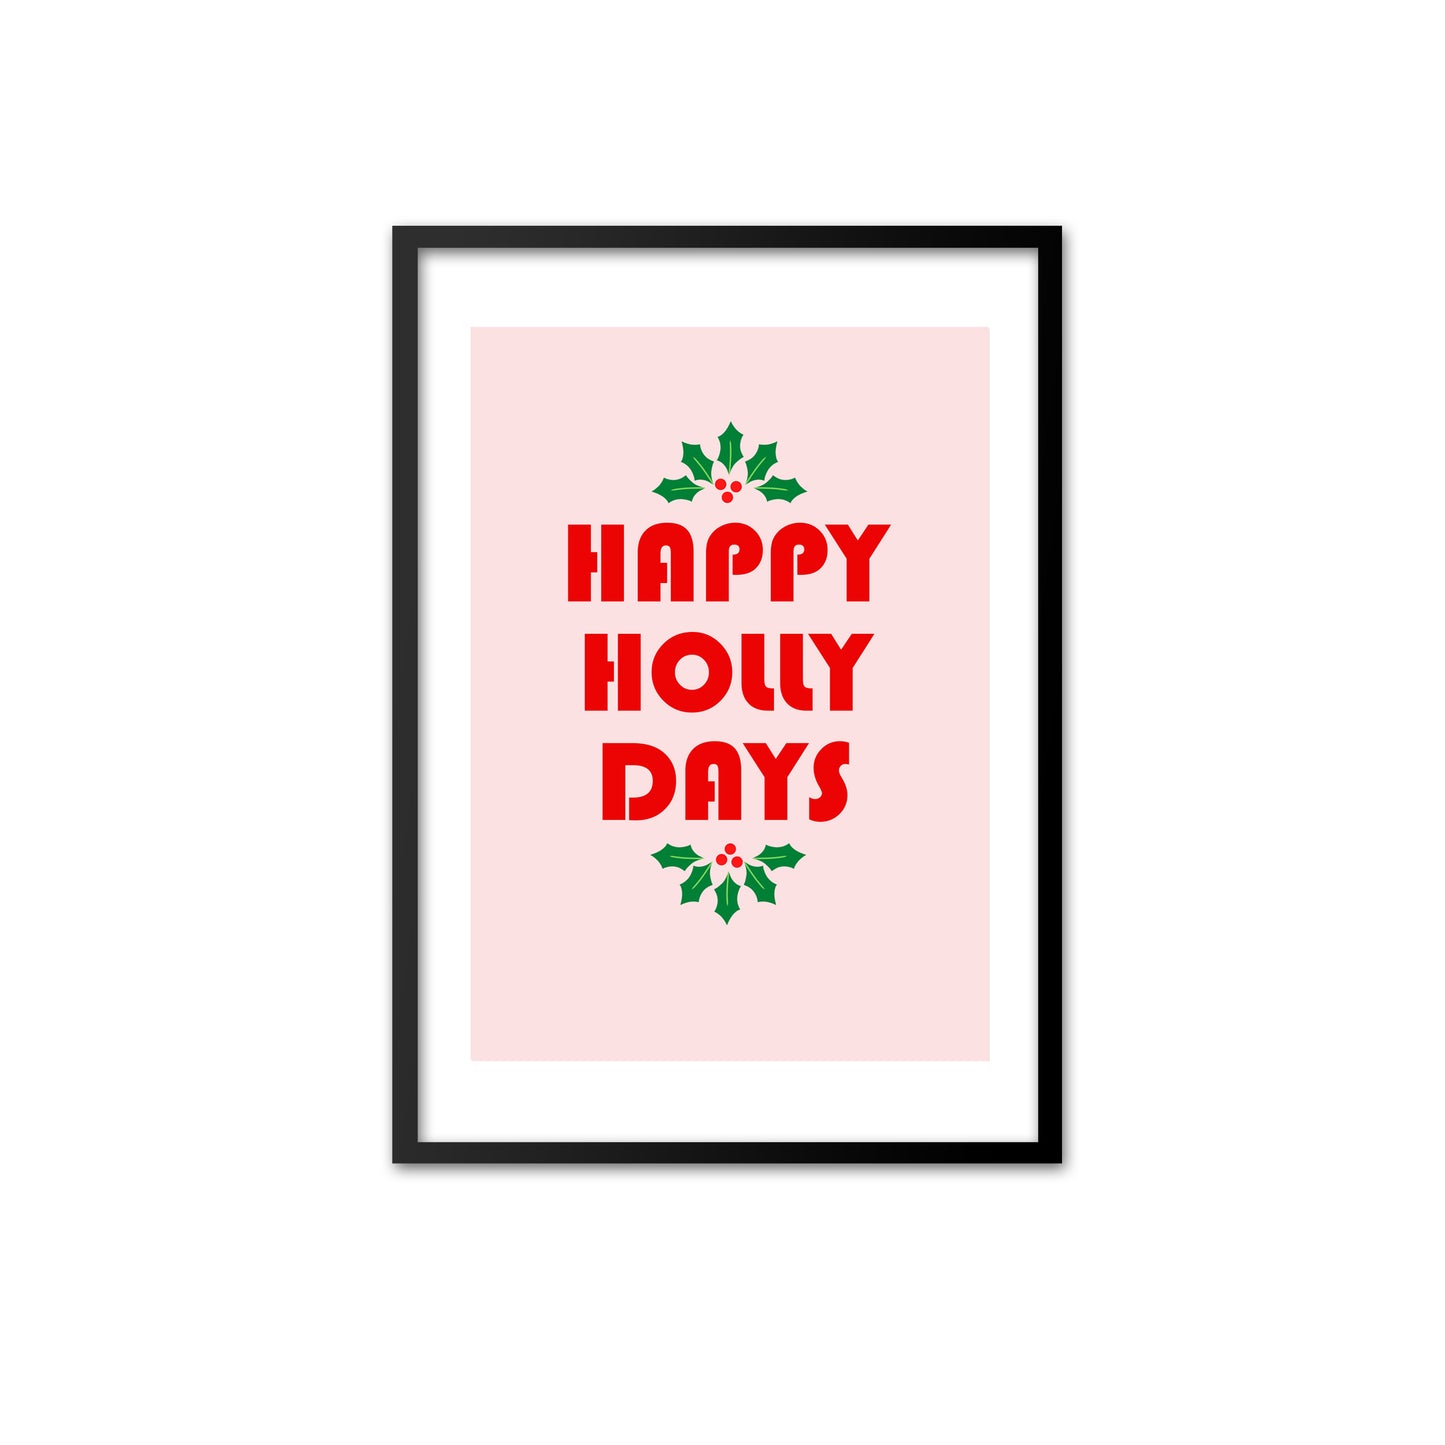 Happy Holly Days - red on pink print